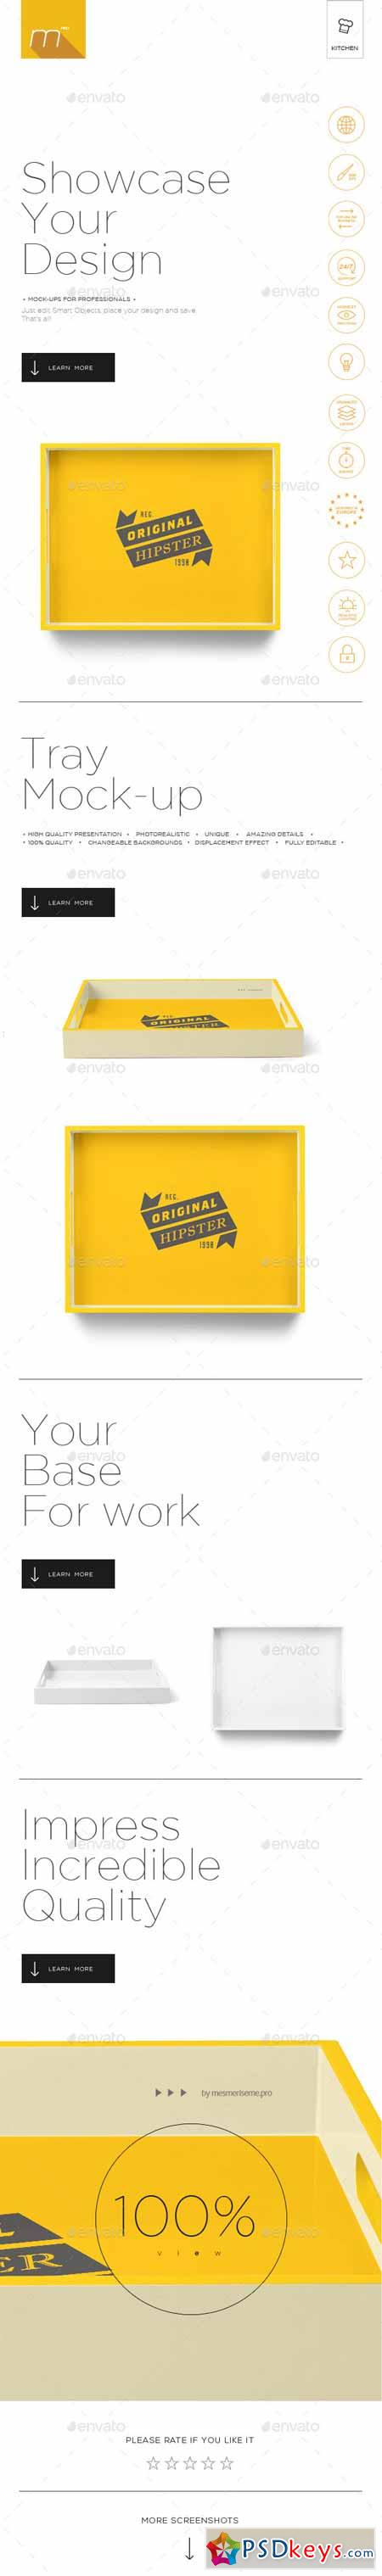 Tray Mock-up 11477673 » Free Download Photoshop Vector Stock image Via Torrent Zippyshare From ...